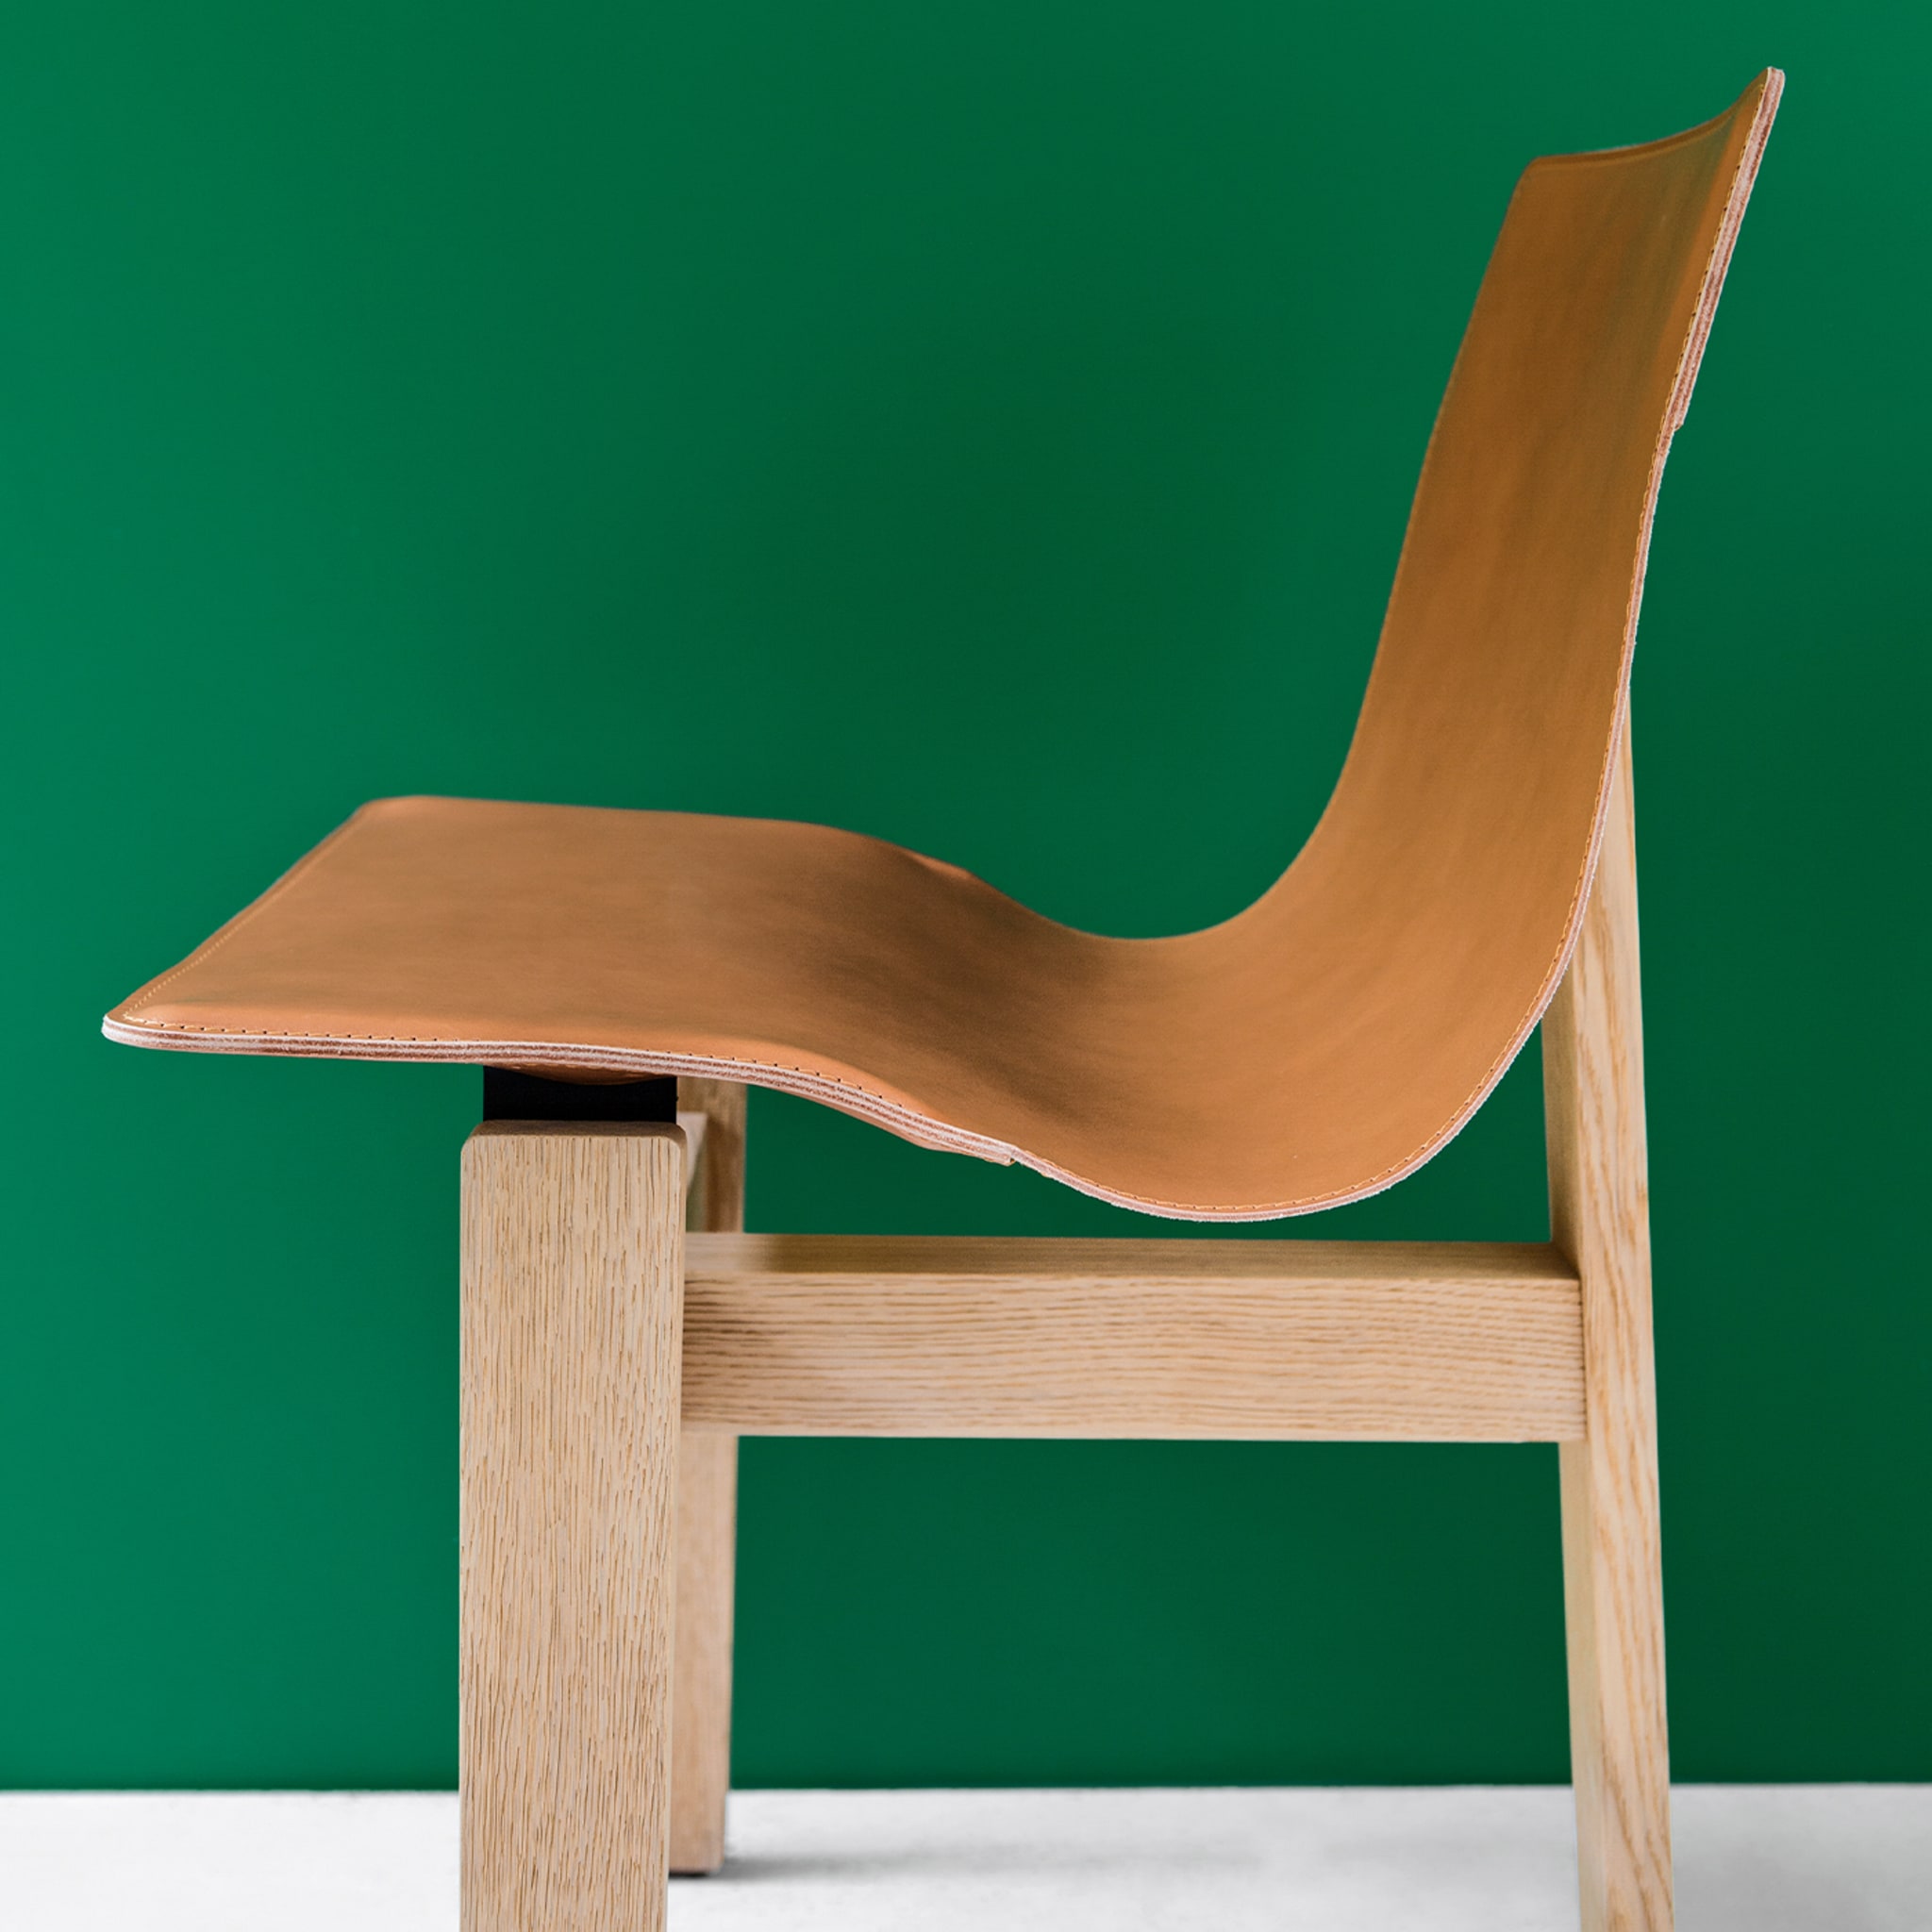 Tre Durmast Natural Leather Chair by Angelo Mangiarotti - Alternative view 2